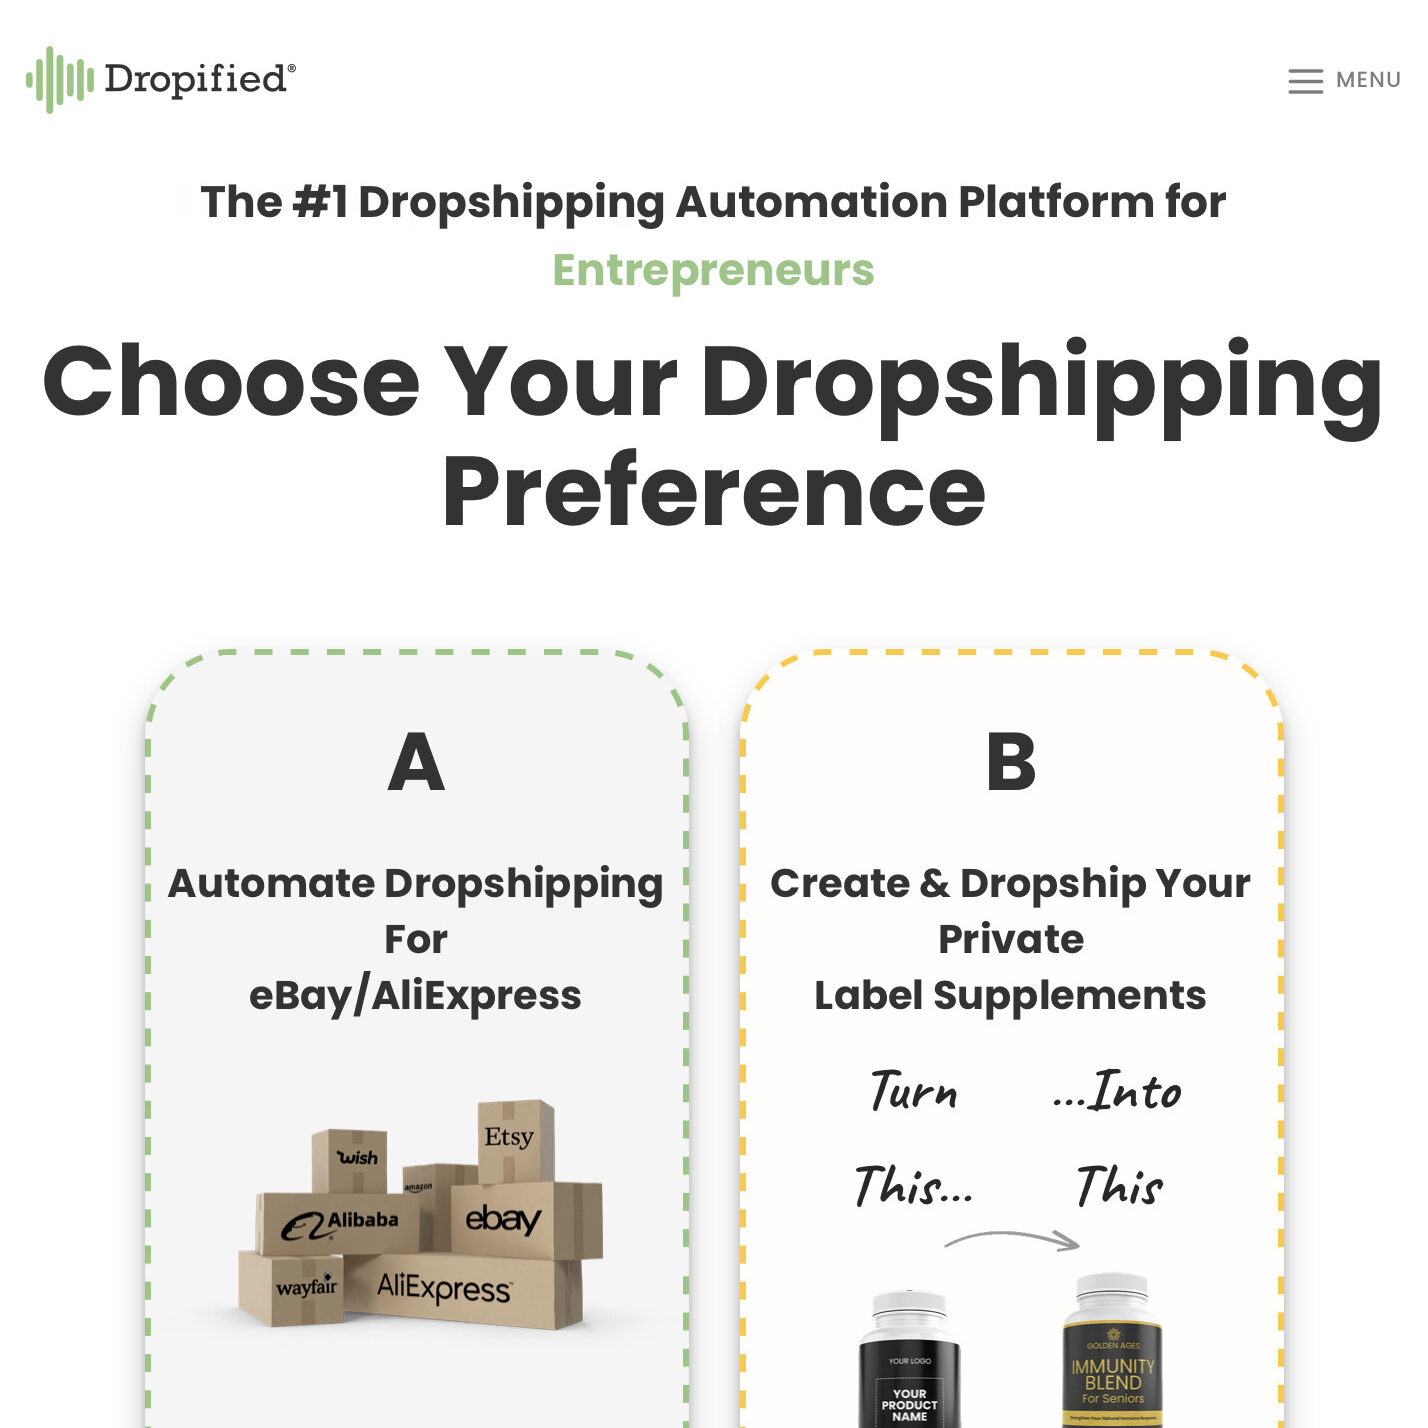 Dropified | Dropshipping suppliers in India